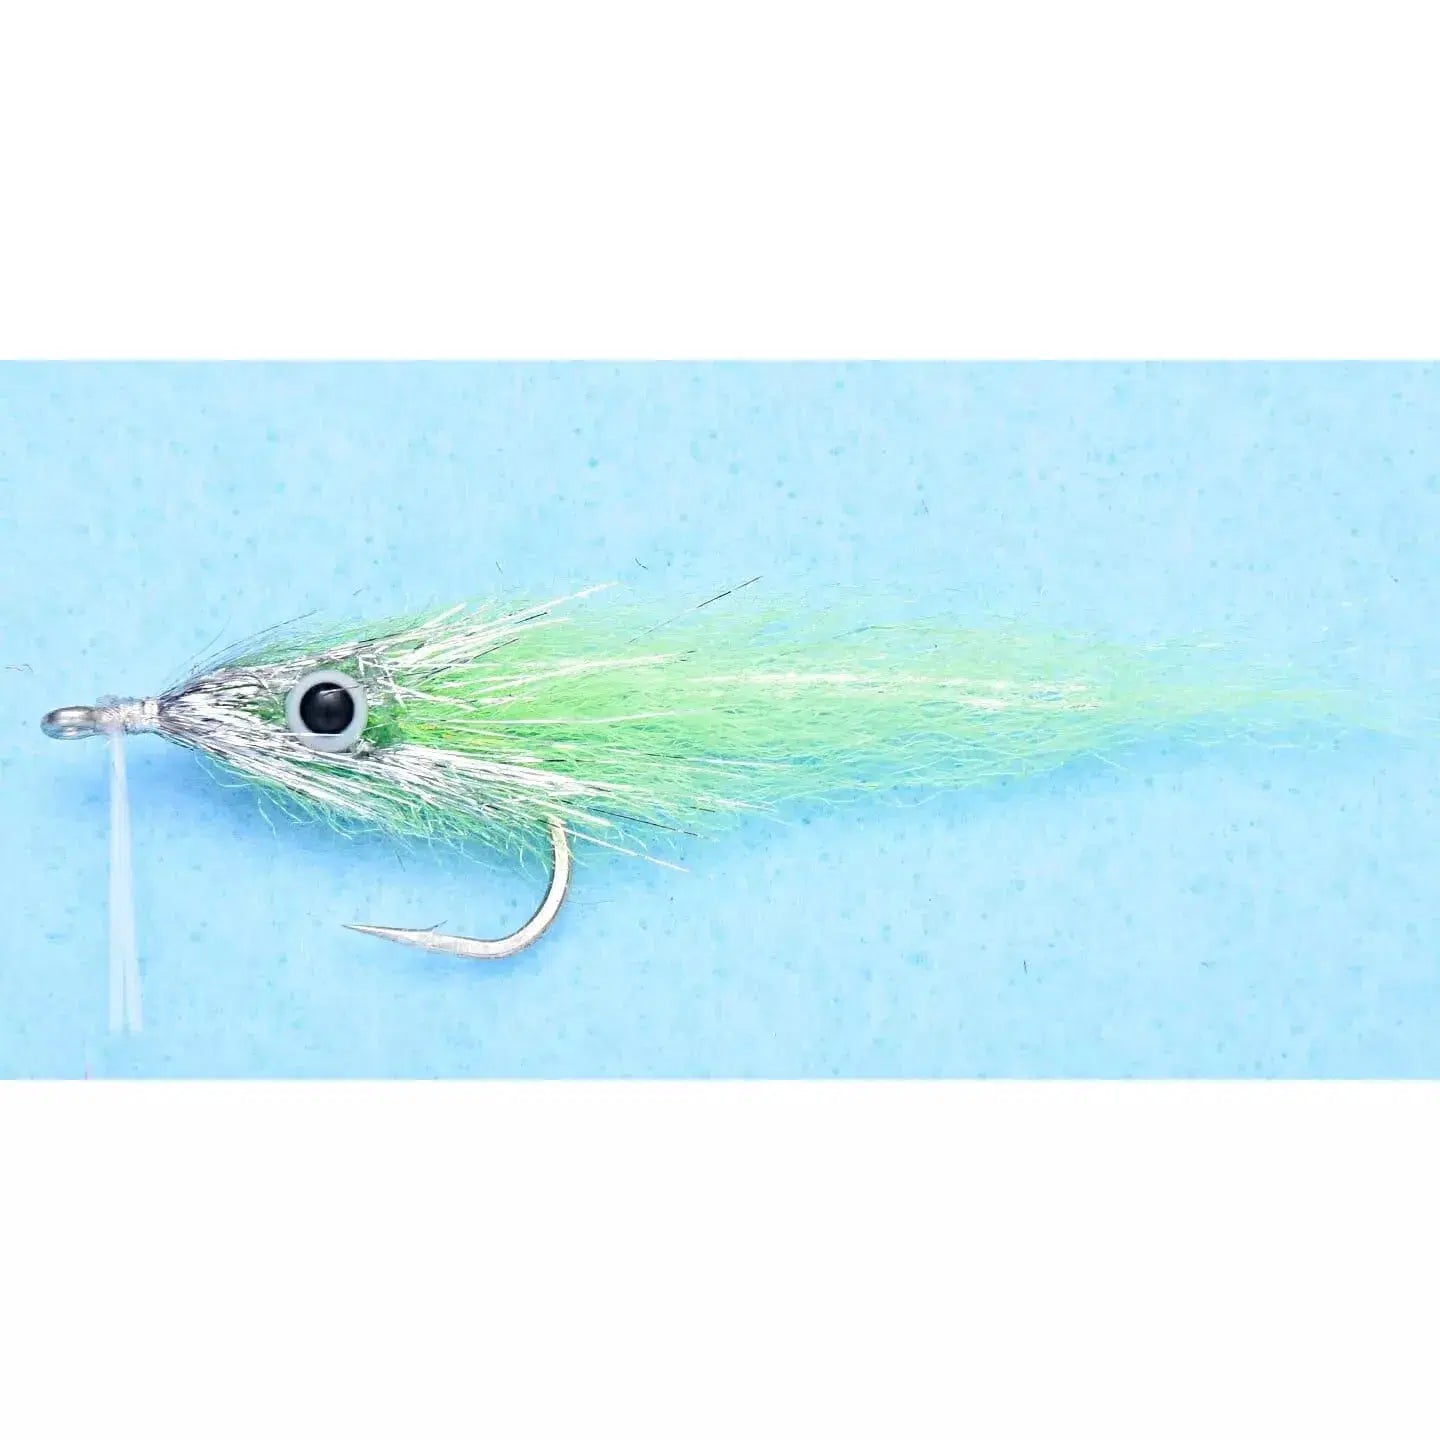 Enrico Puglisi Bay Anchovy Fly-Lure - Saltwater Fly-Enrico Puglisi-Chartreuse-Size 1/0-Fishing Station